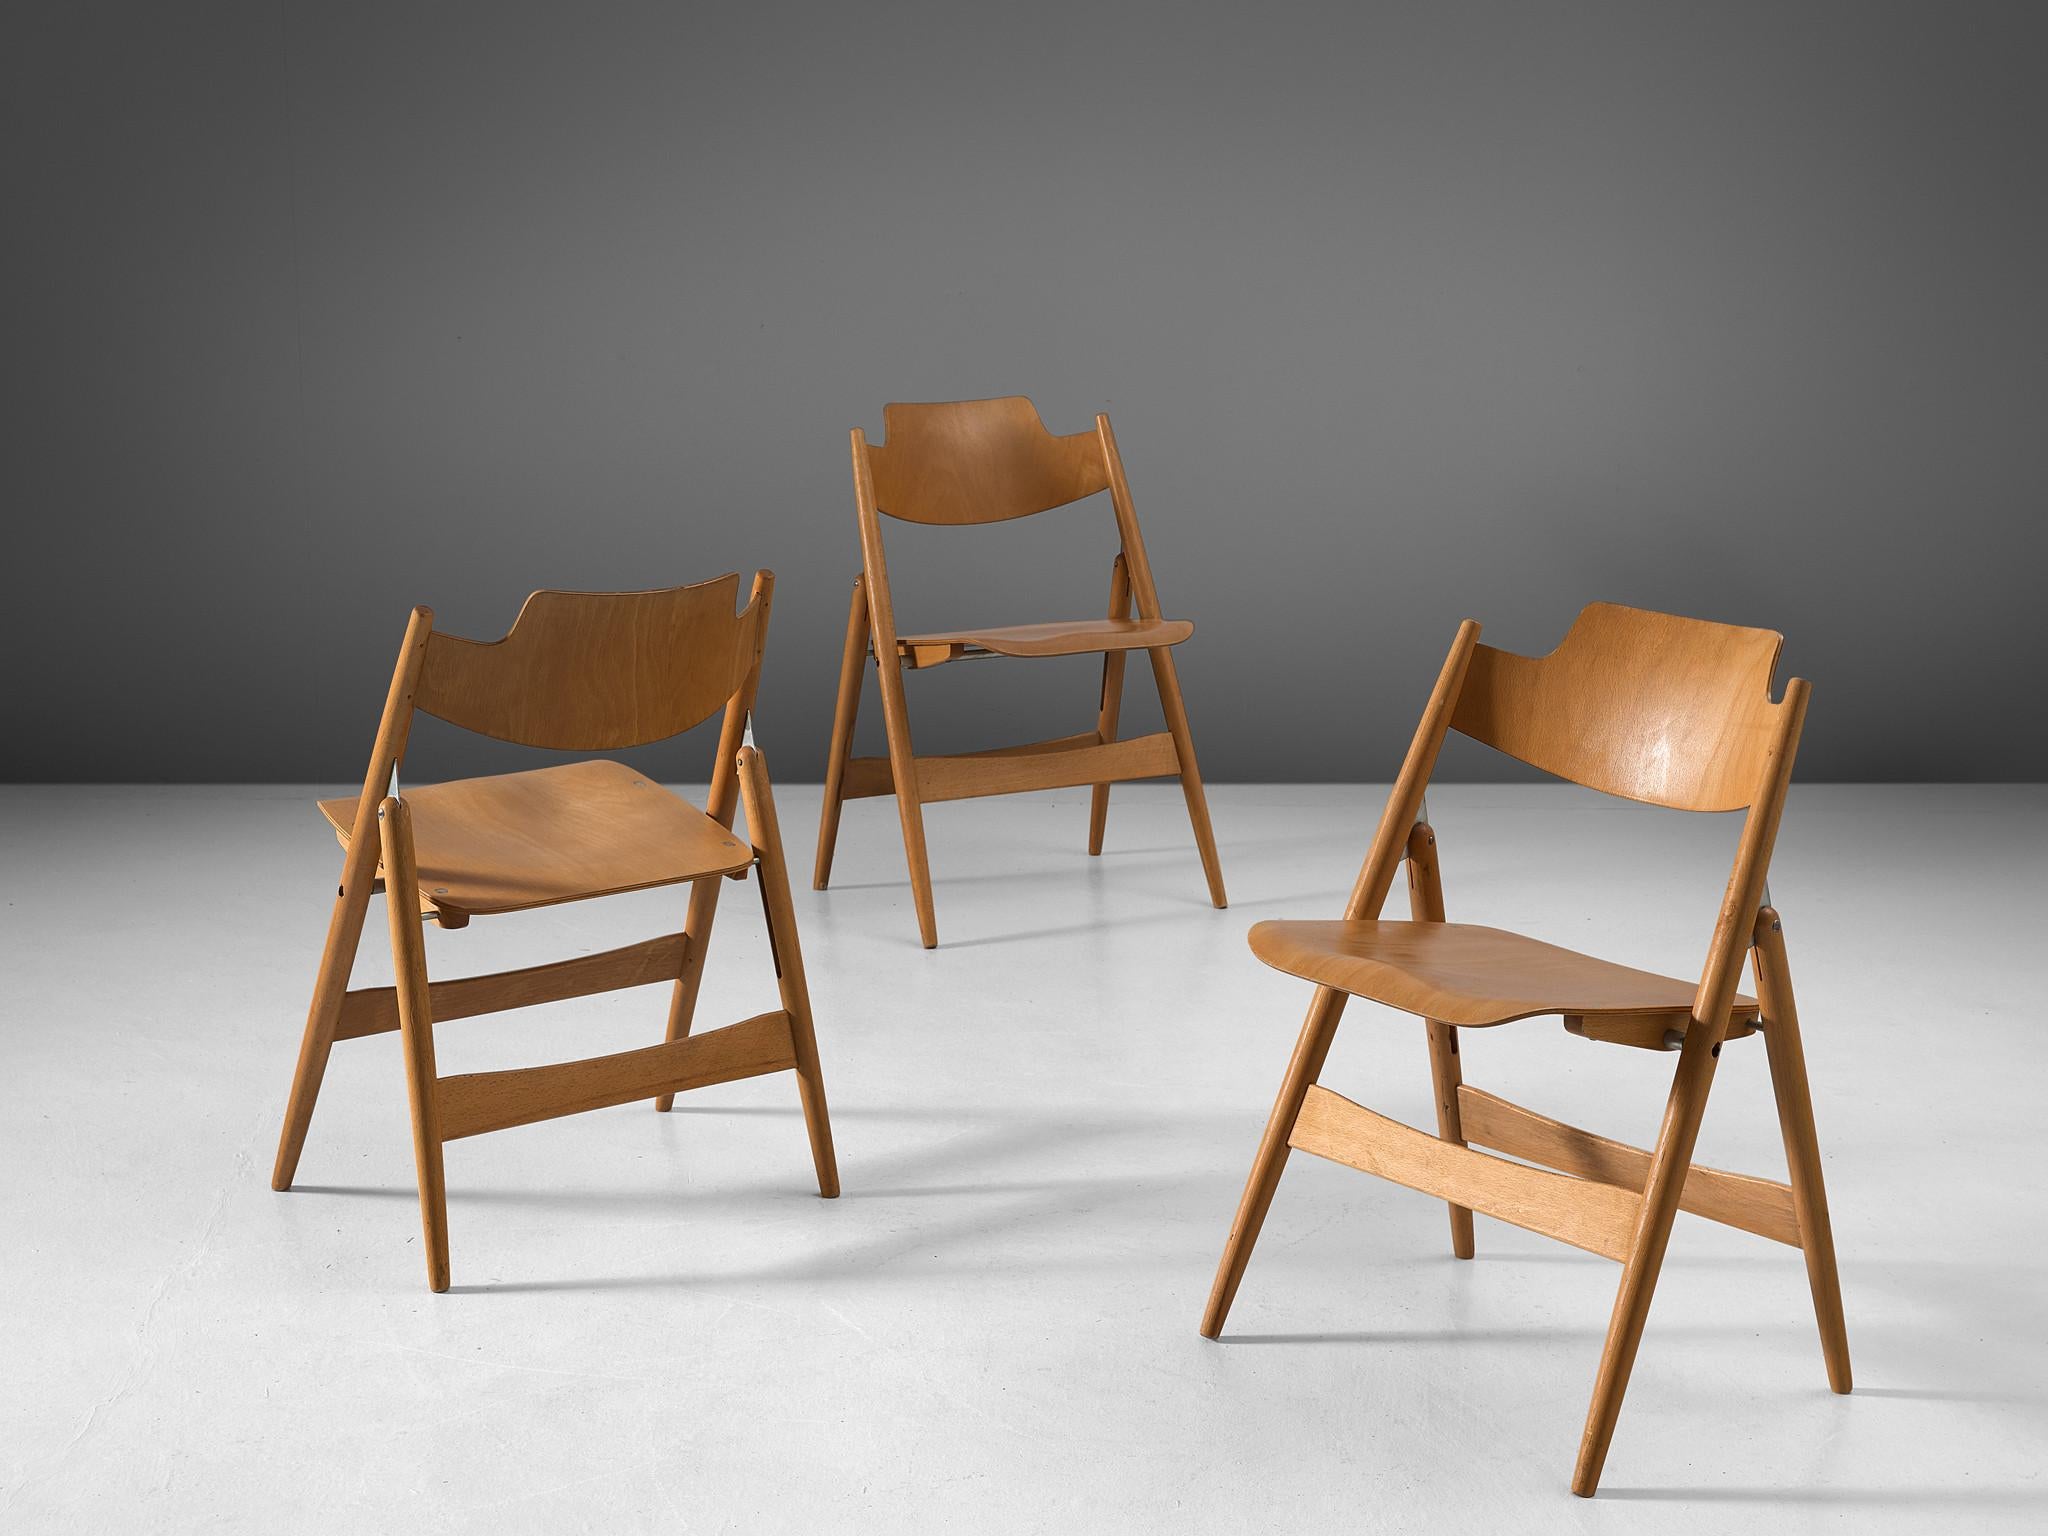 Egon Eiermann for Wilde & Spieth, foldable chairs 'SE 18', beech, Germany, design 1952, later production.

Famous German architect Egon Eiermann who is known for his keen designs embracing new materials and forms of the postwar period, received the